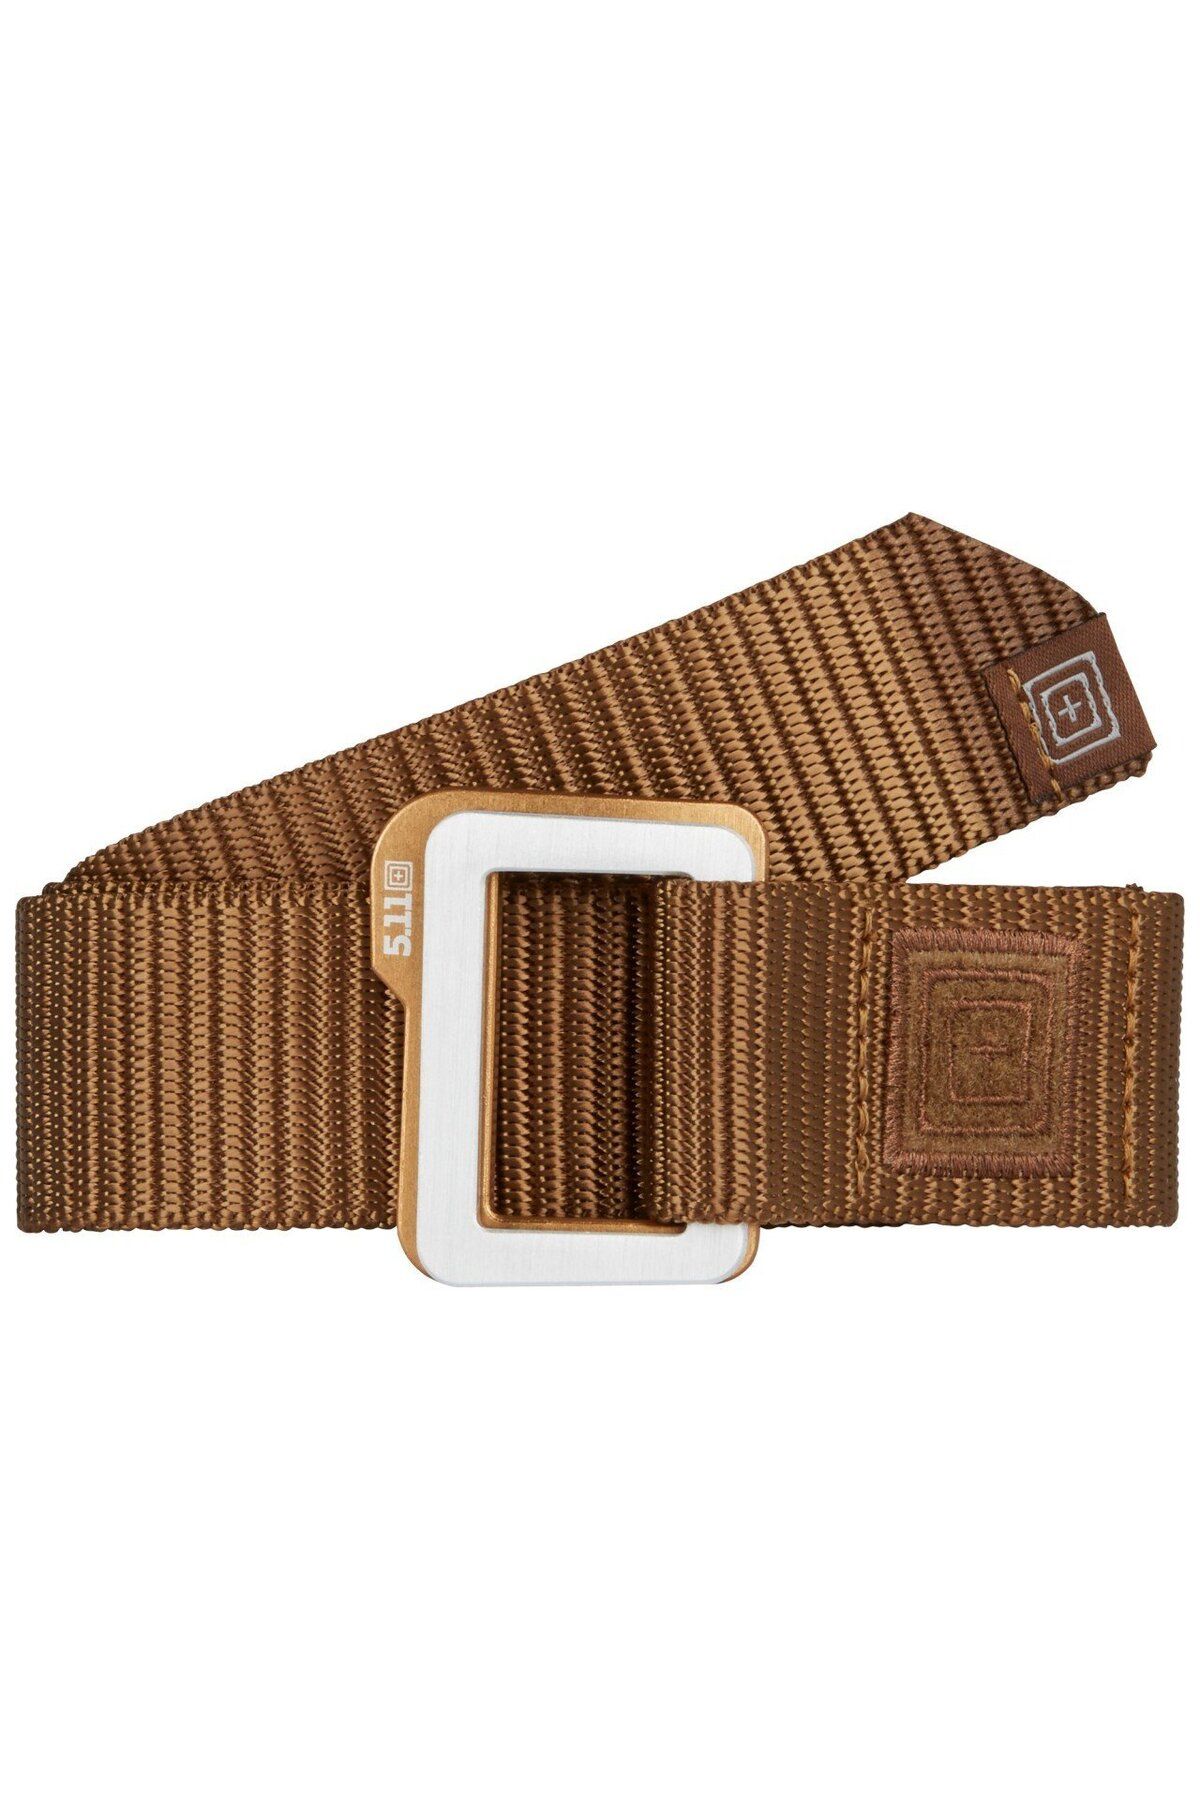 5.11 Tactical 5.11 Traverse Double Buckle Kemer